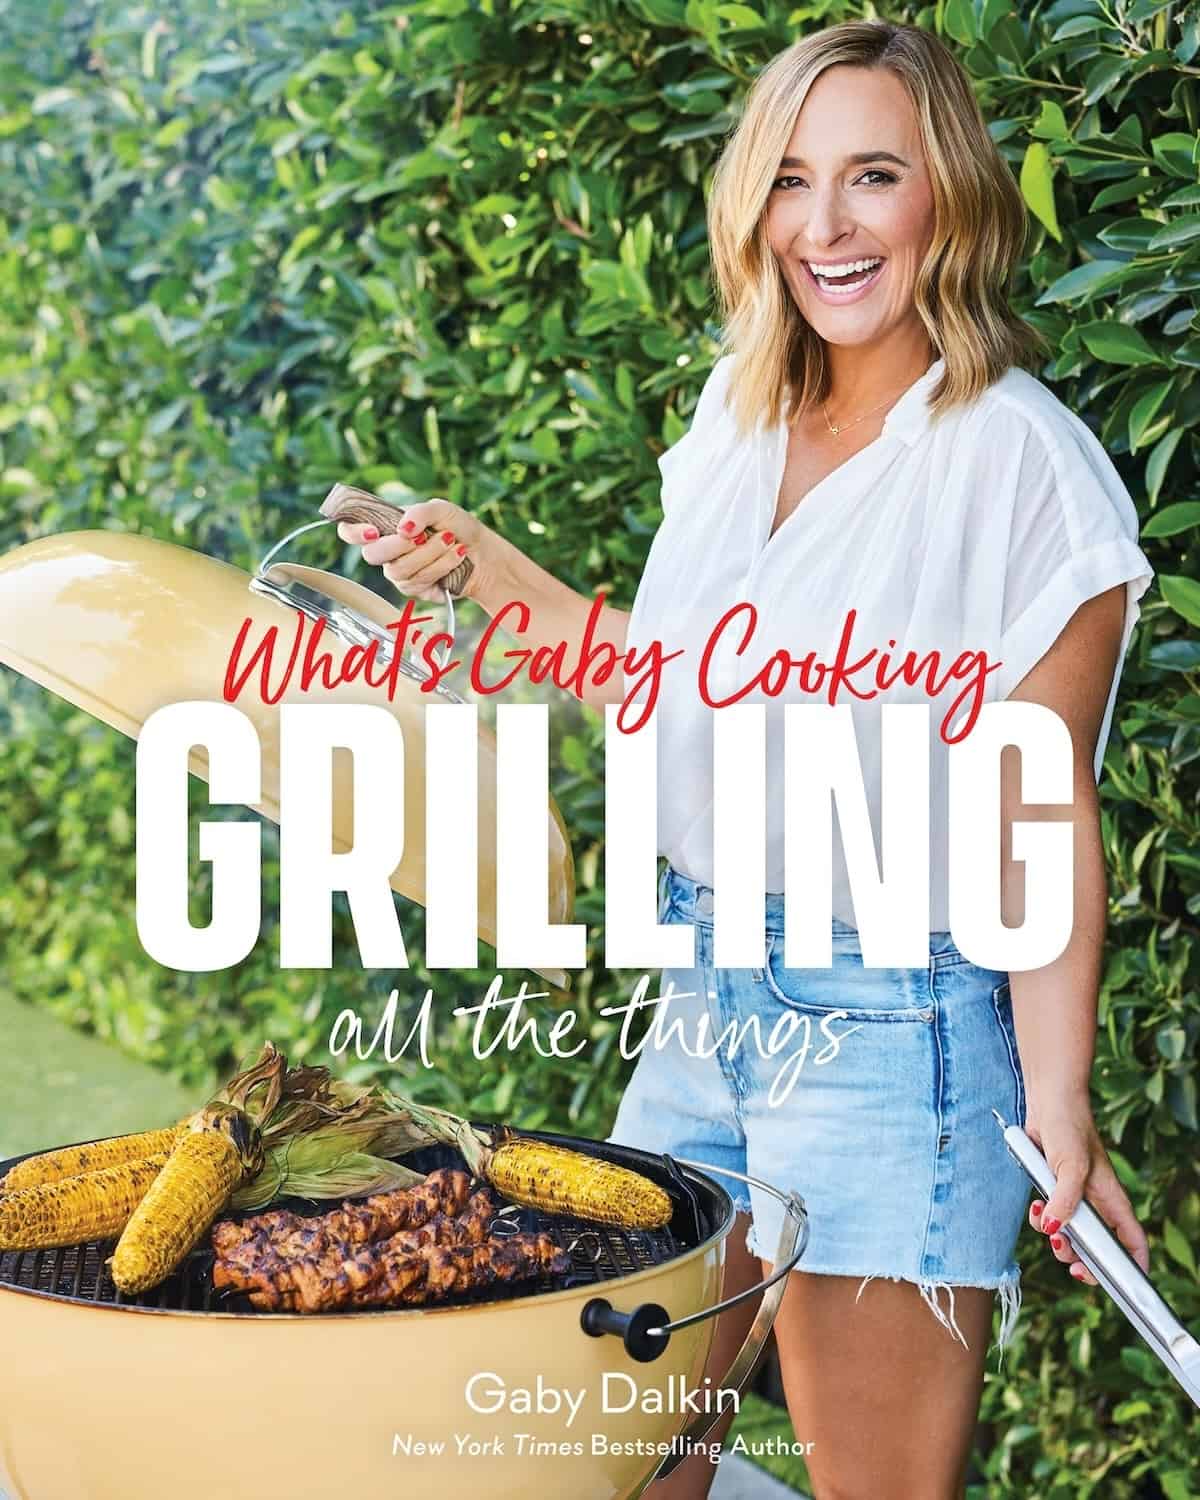 LAUNCH DAY // Cookbook #5 // Grilling All The Things IS HERE!!